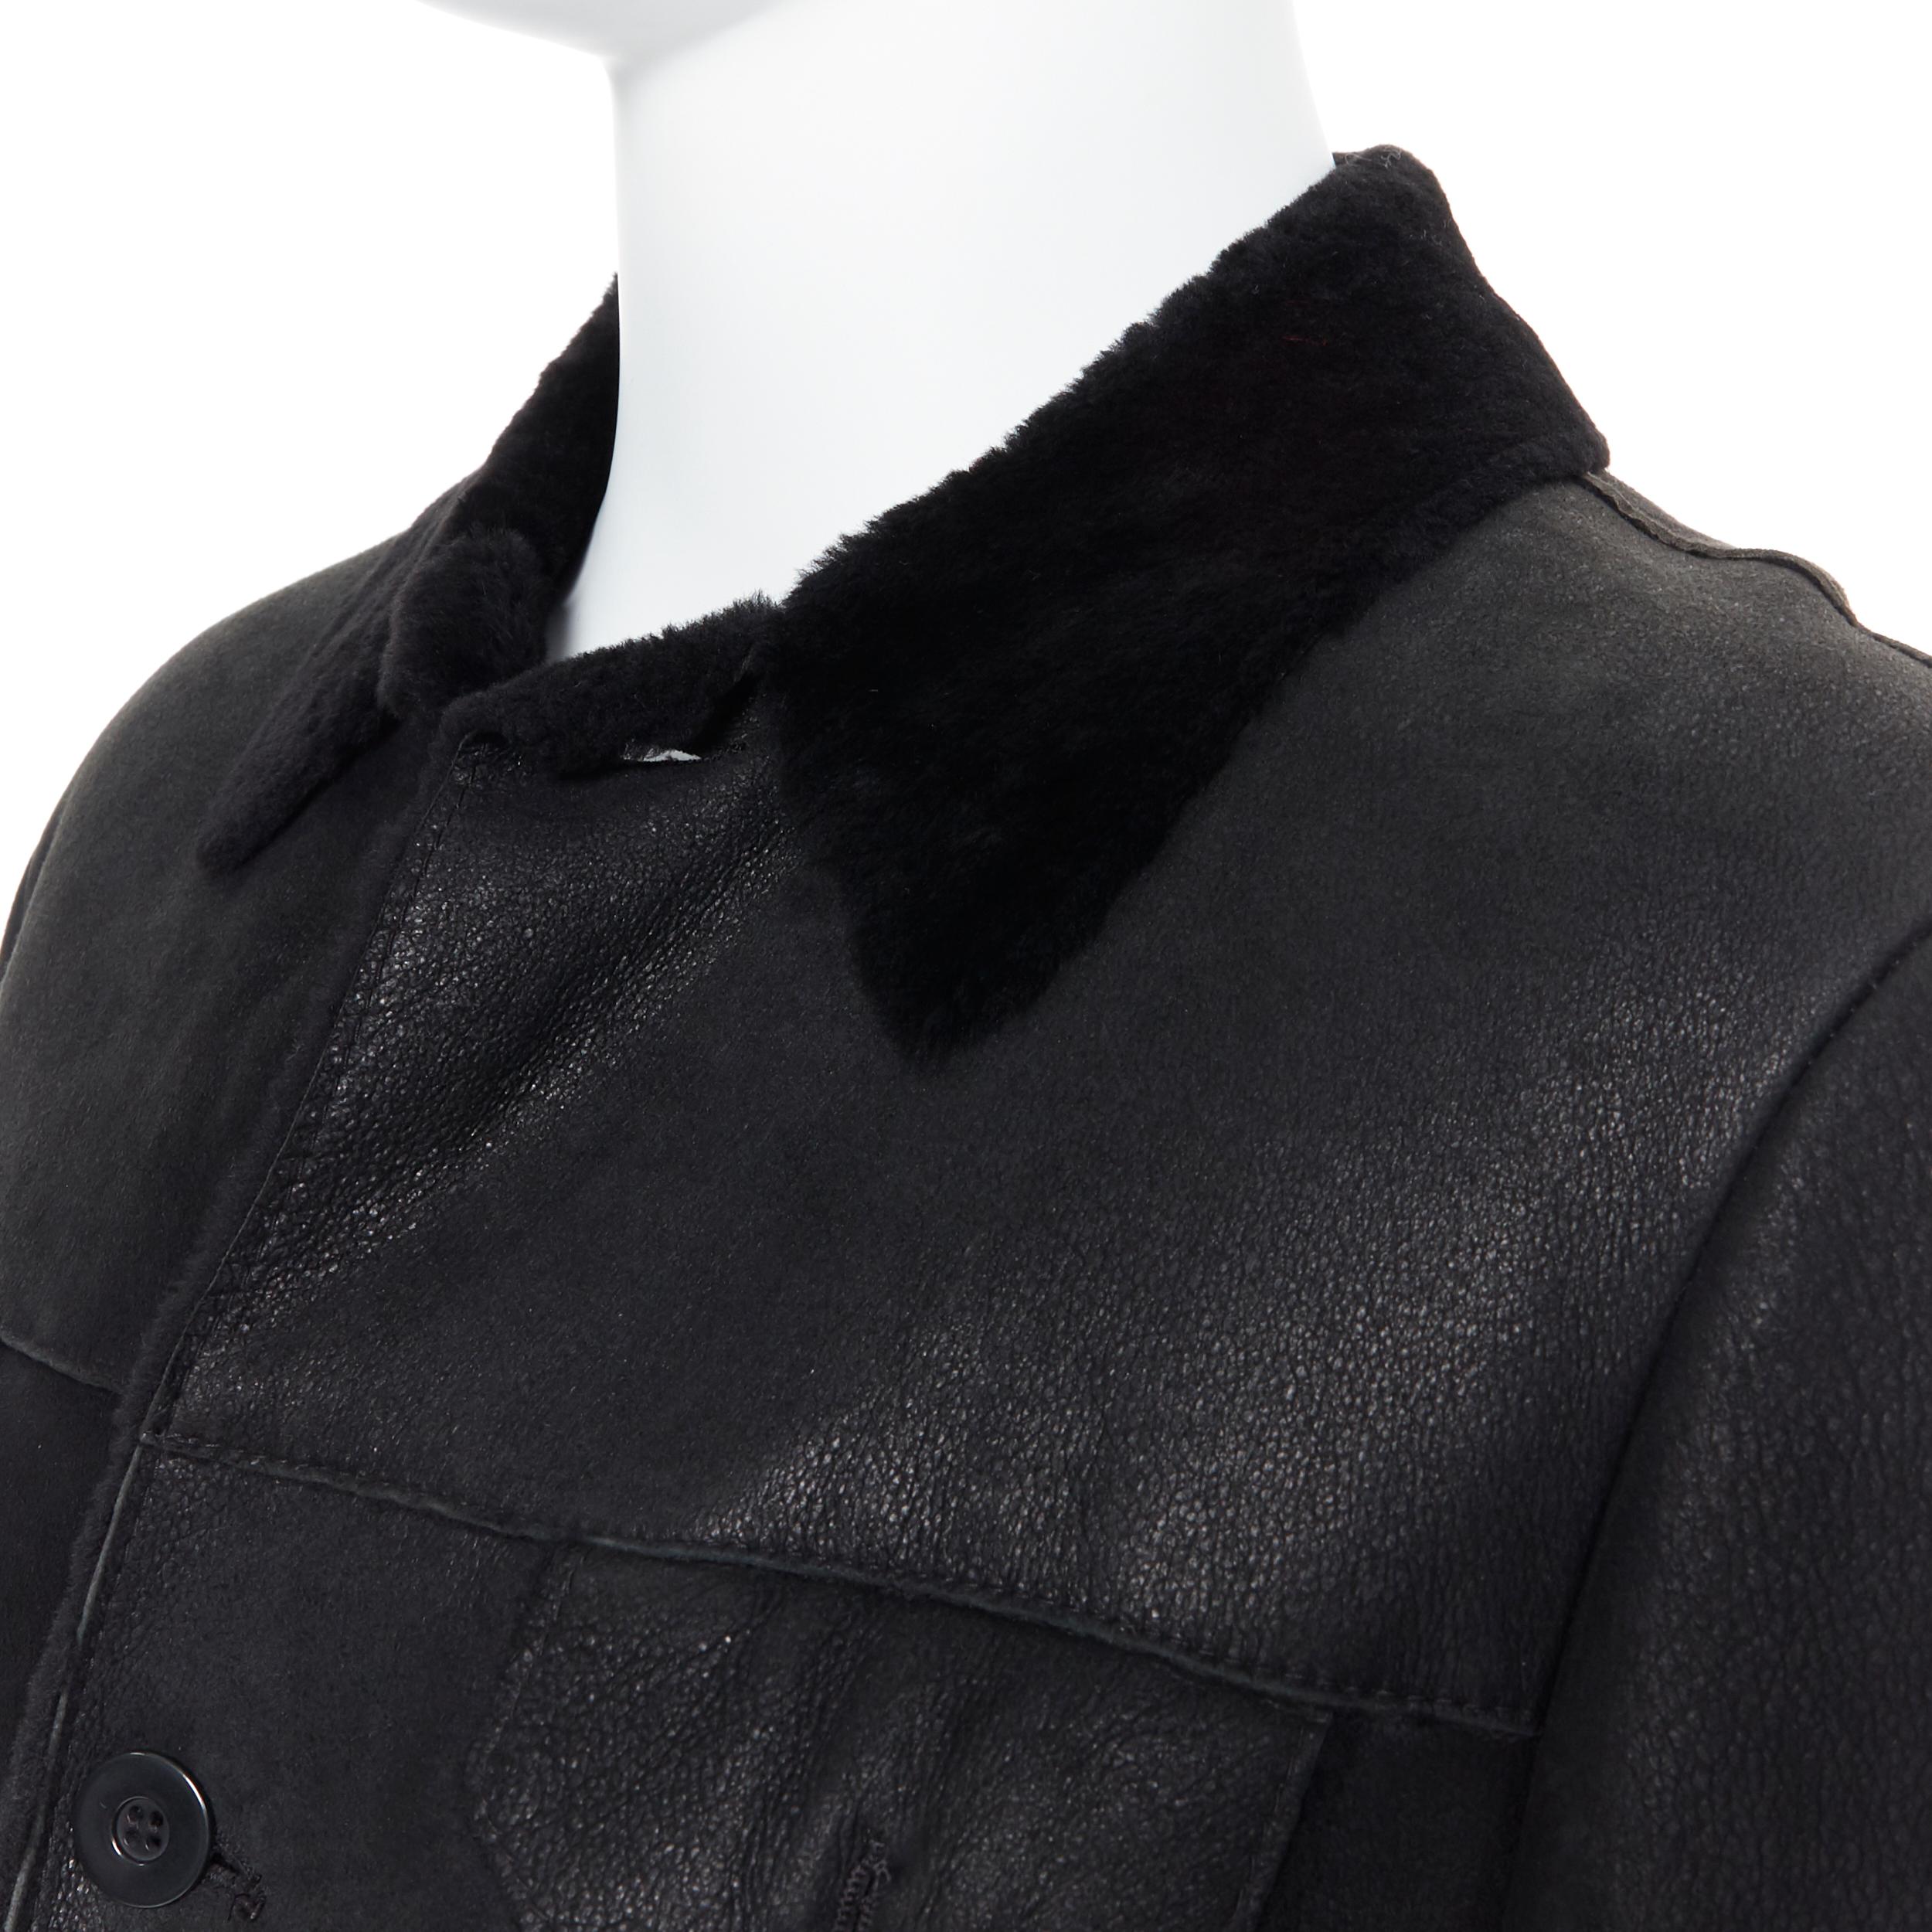 EMPORIO ARMANI black leather shearling lined 4-pocket aviator winter coat EU50 L
Brand: Emporio Armani
Model Name / Style: Shearling jacket
Material: Leather
Color: Black
Pattern: Solid
Closure: Button
Extra Detail: Long sleeve. Collared neckline.